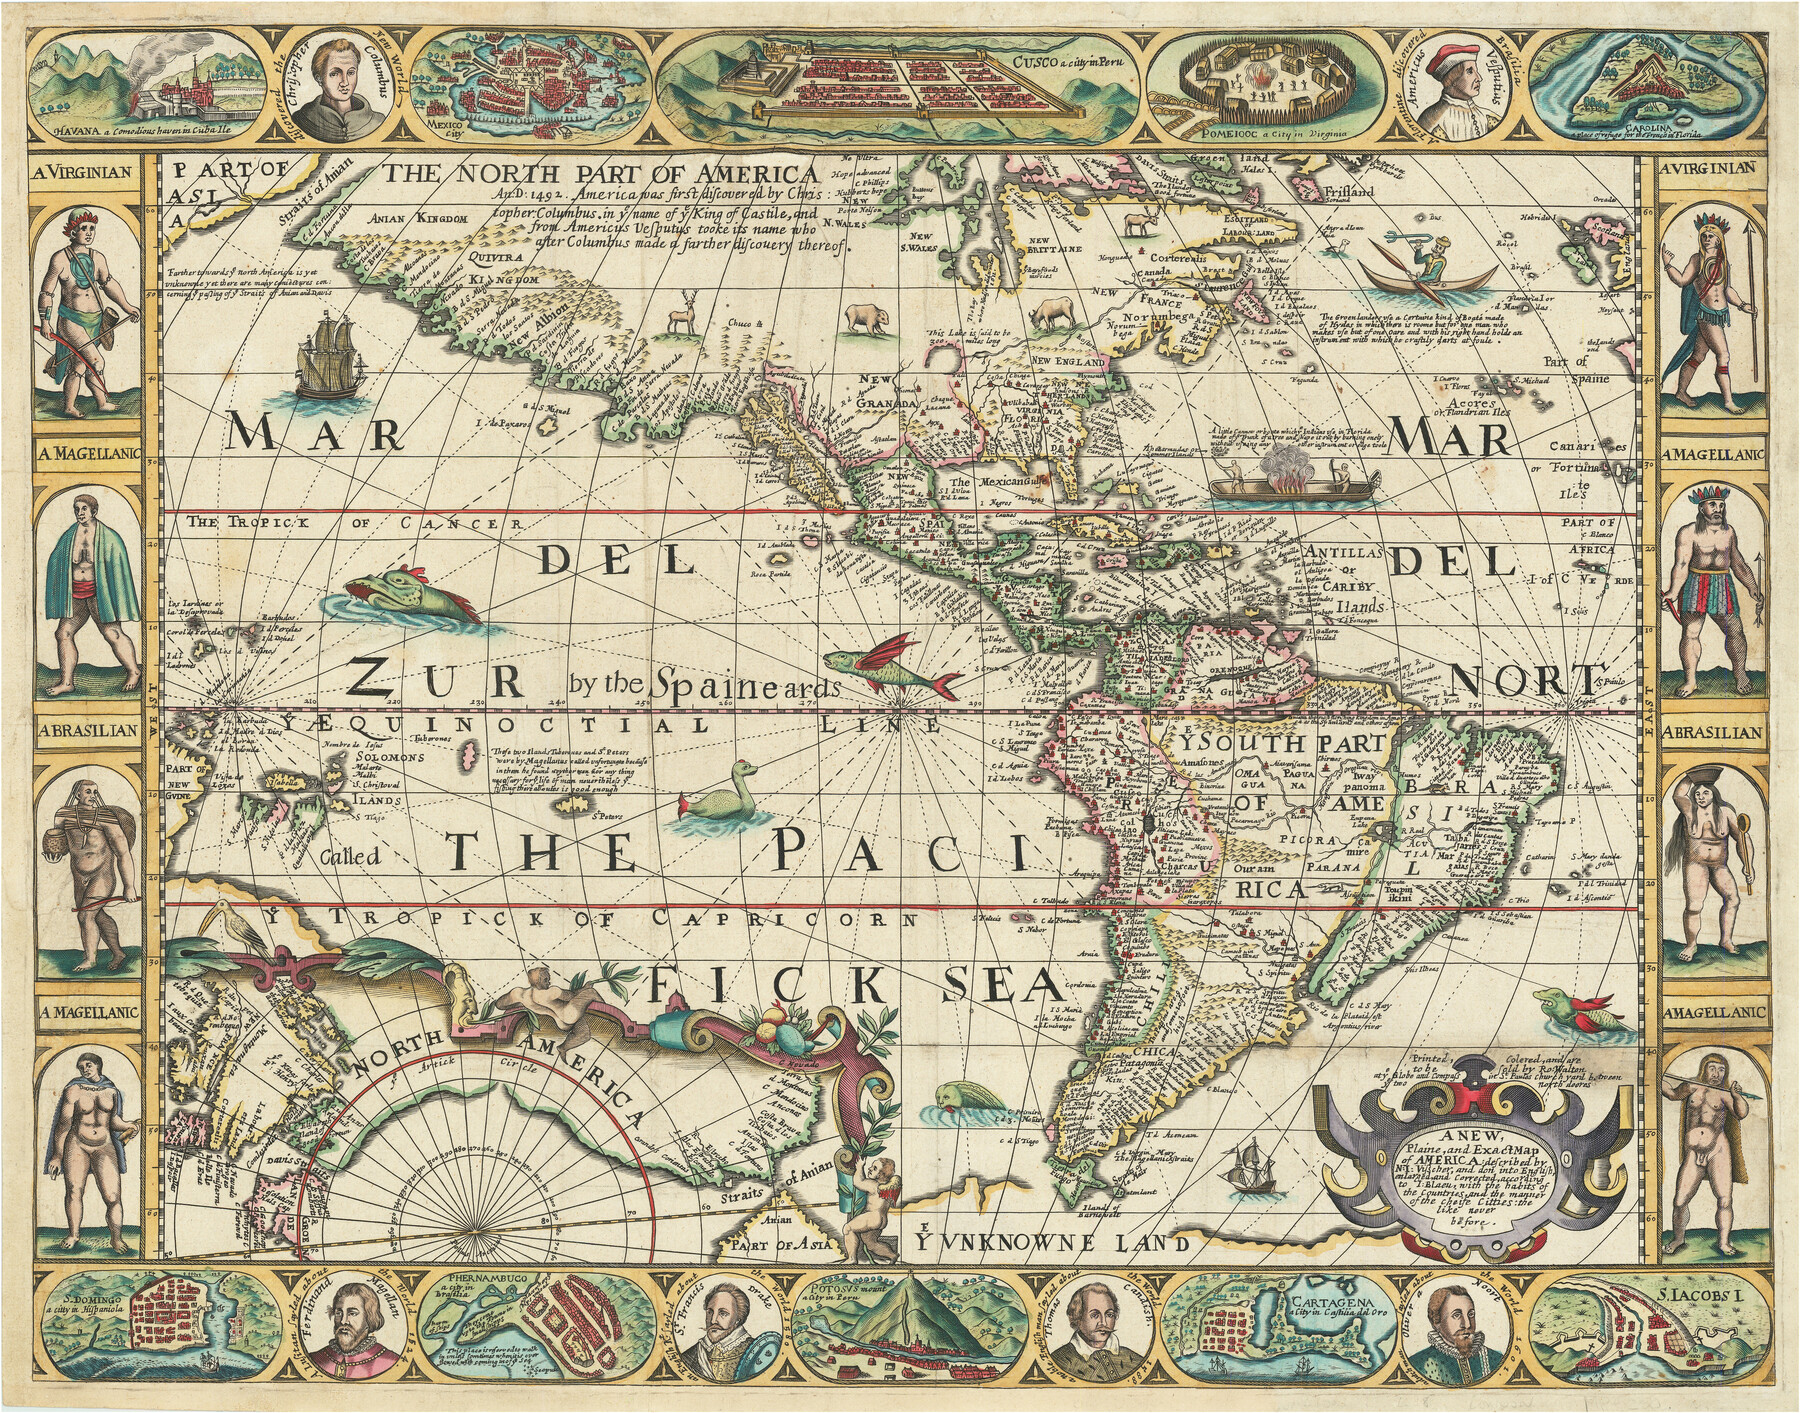 A New, Plaine, and Exact map of America : described by N.I. Visscher, and don into English, enlarged, and corrected, according to I. Blaeu, with the habits of the countries, and the manner of the cheife Citties, the like never before